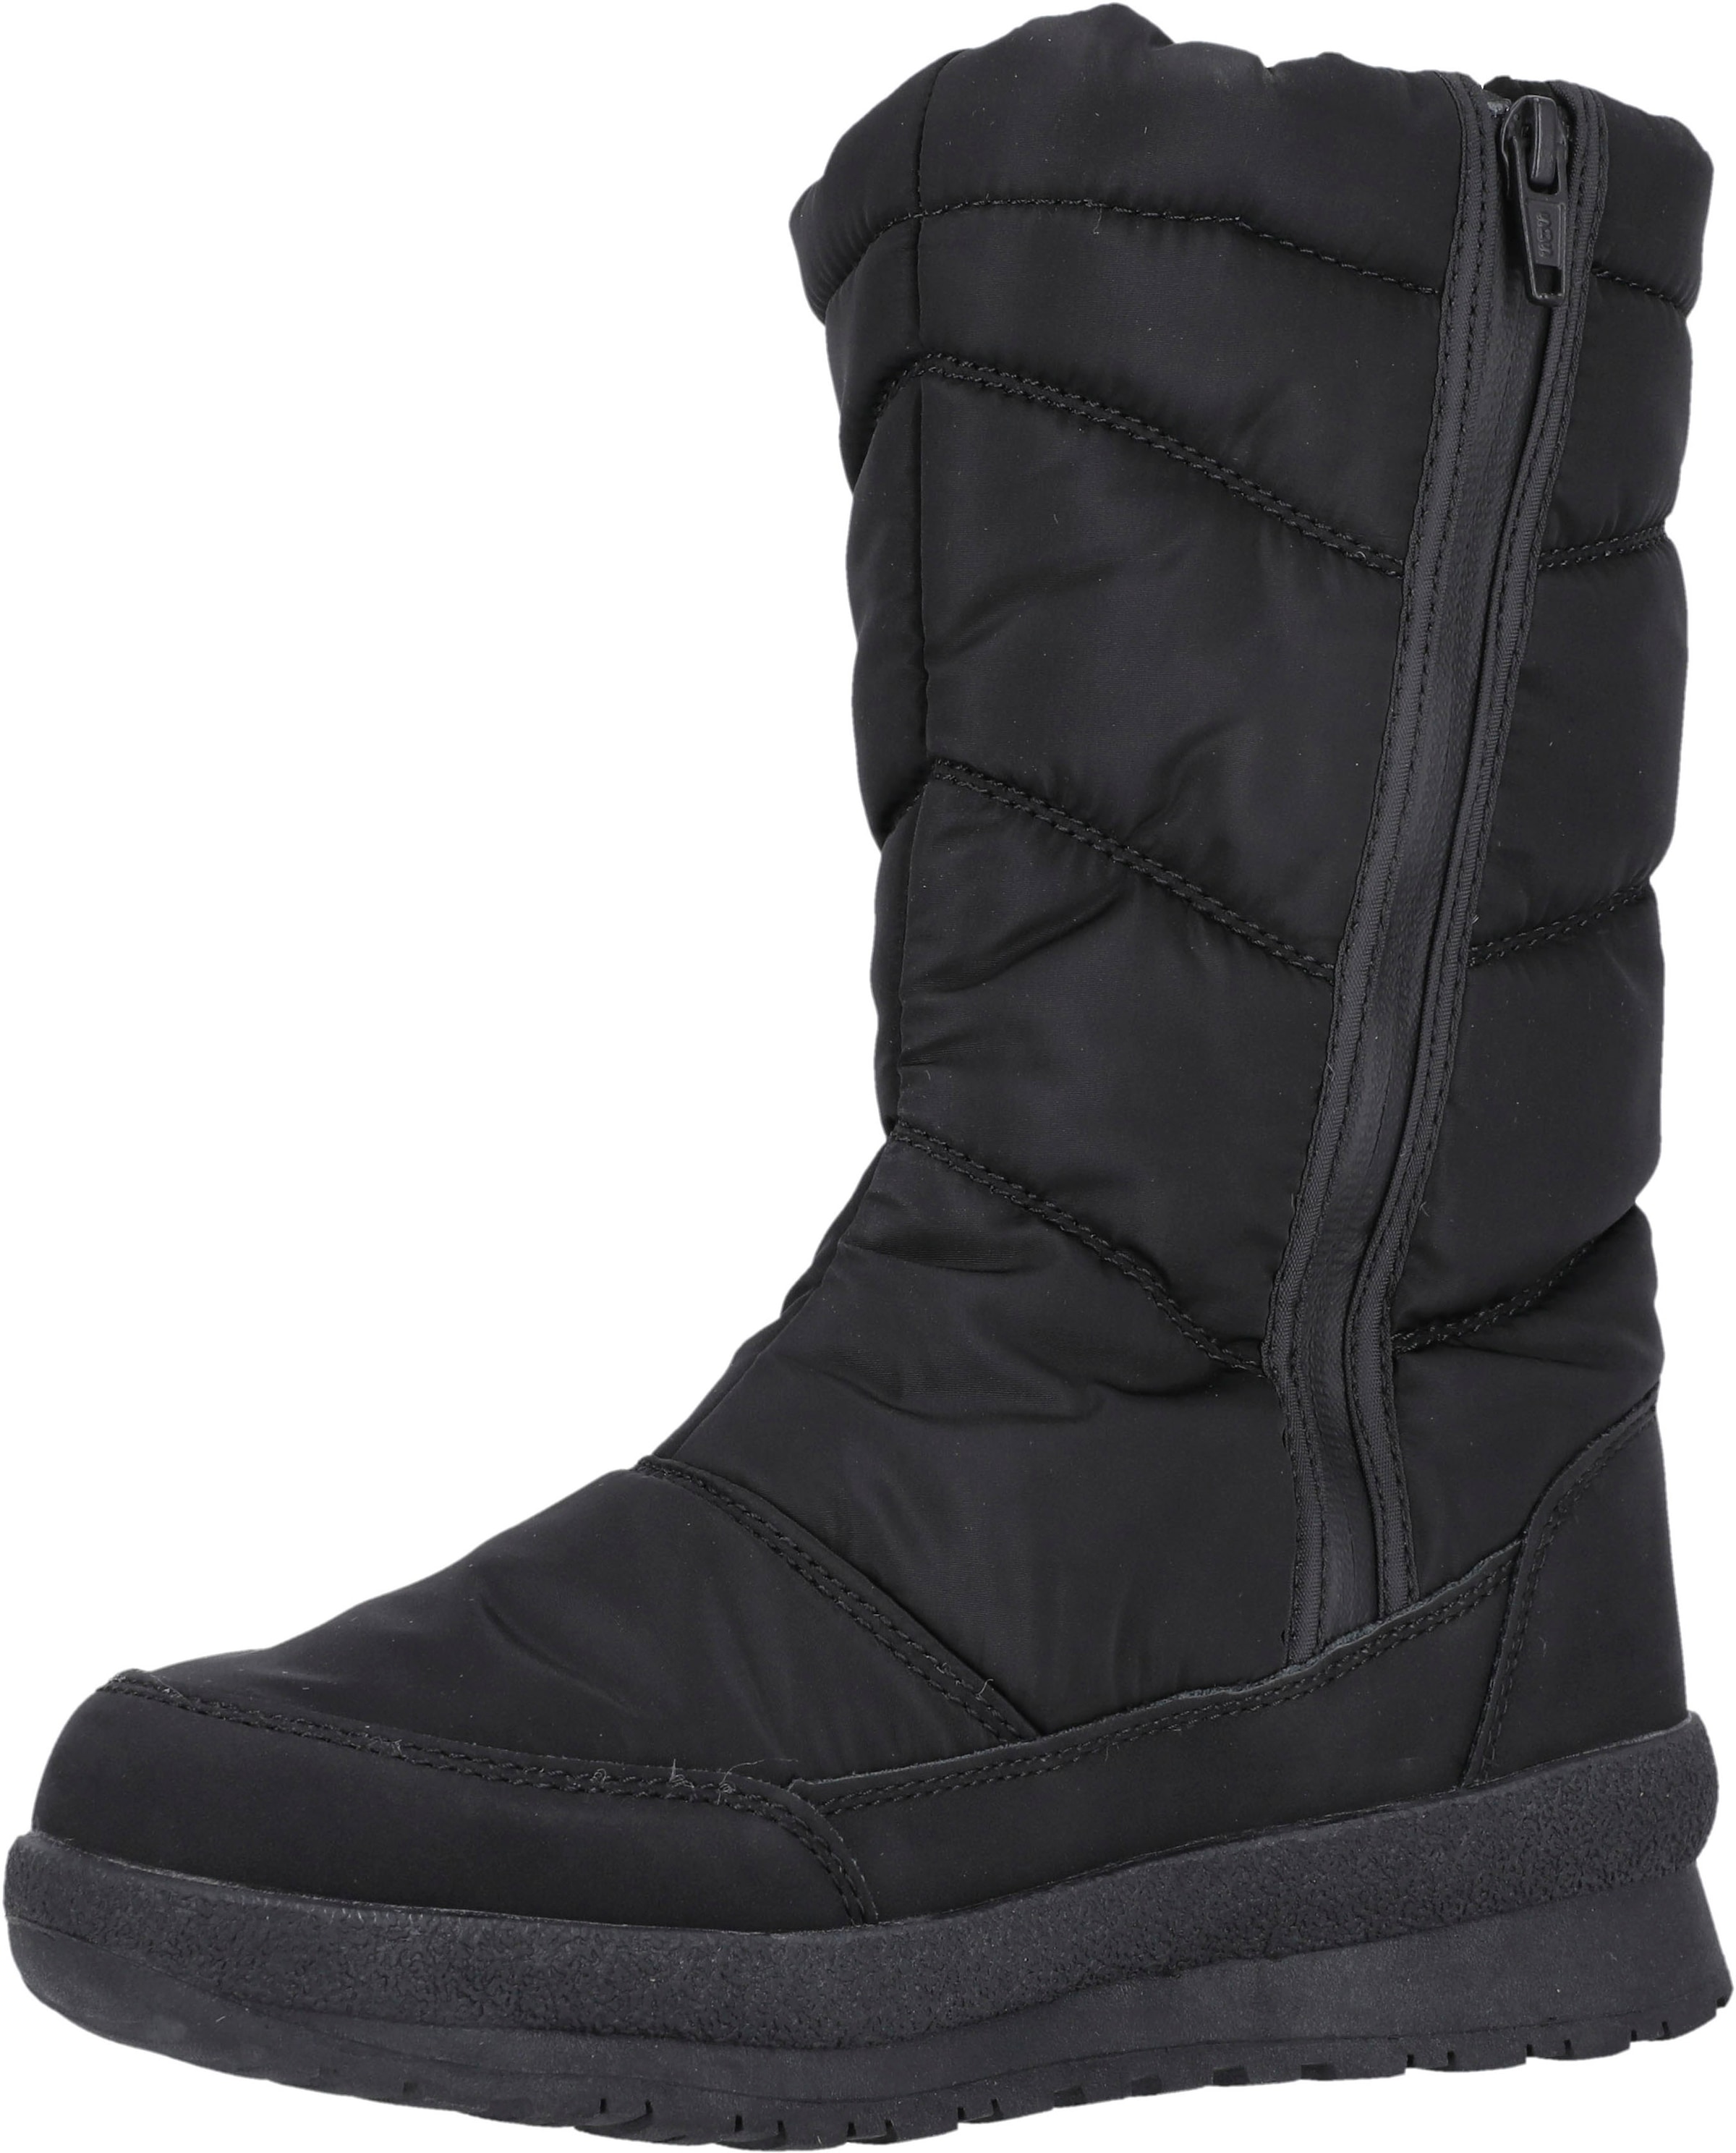 WHISTLER Winterboots »WHW234153«, Warmfutter